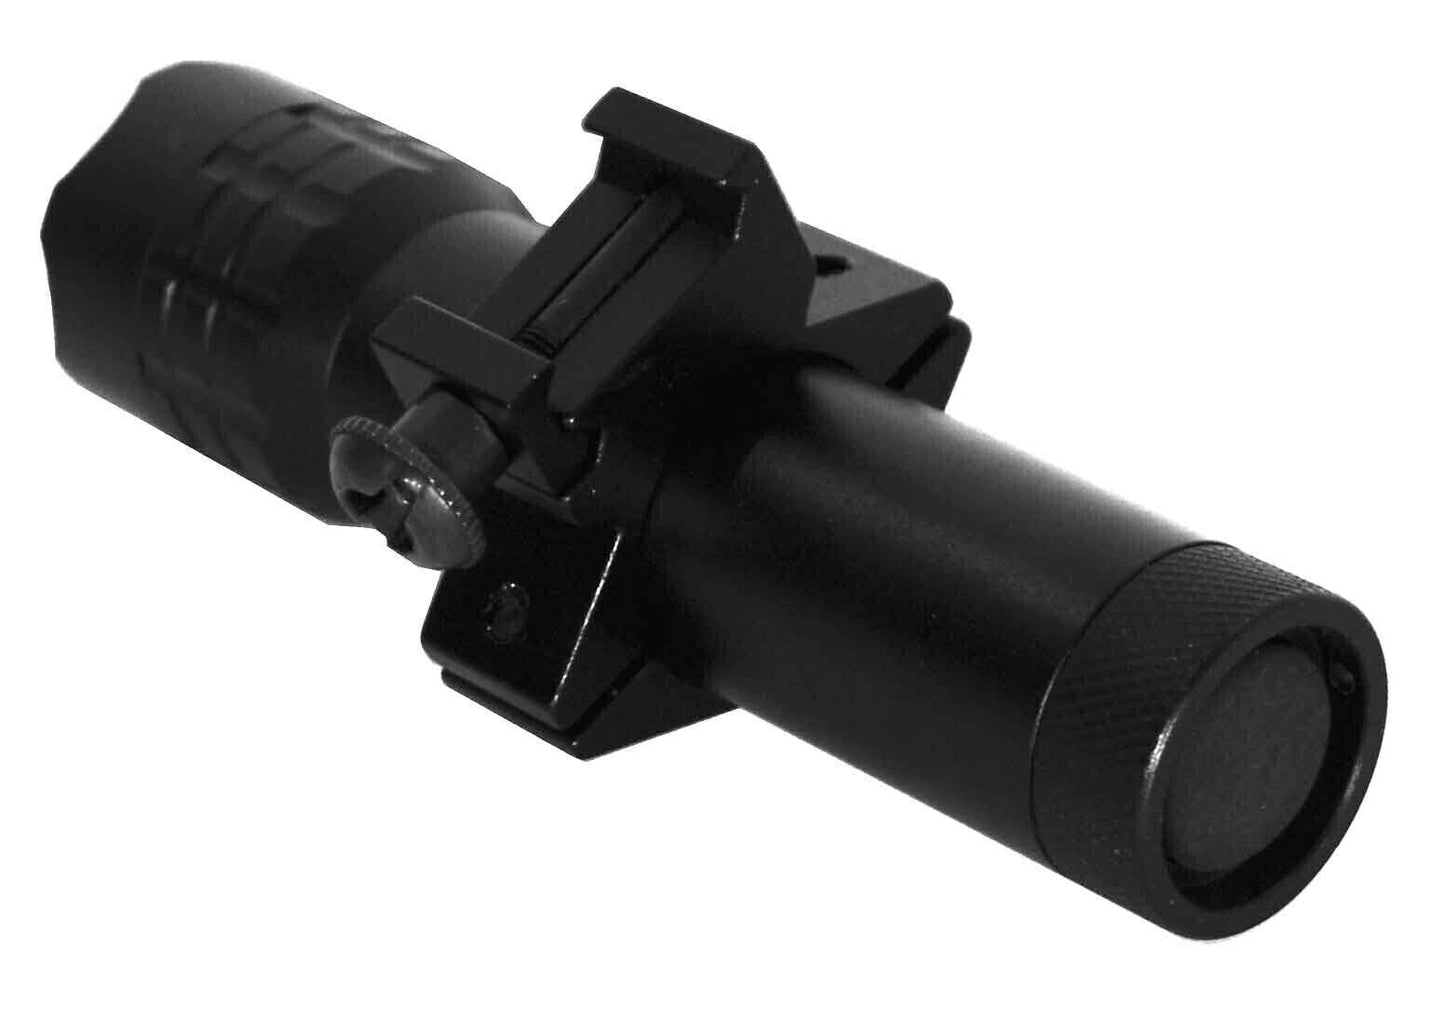 Tactical Flashlight Weaponlight With Gun Mount Wire Cord Switch compatible with tactical paintball guns.